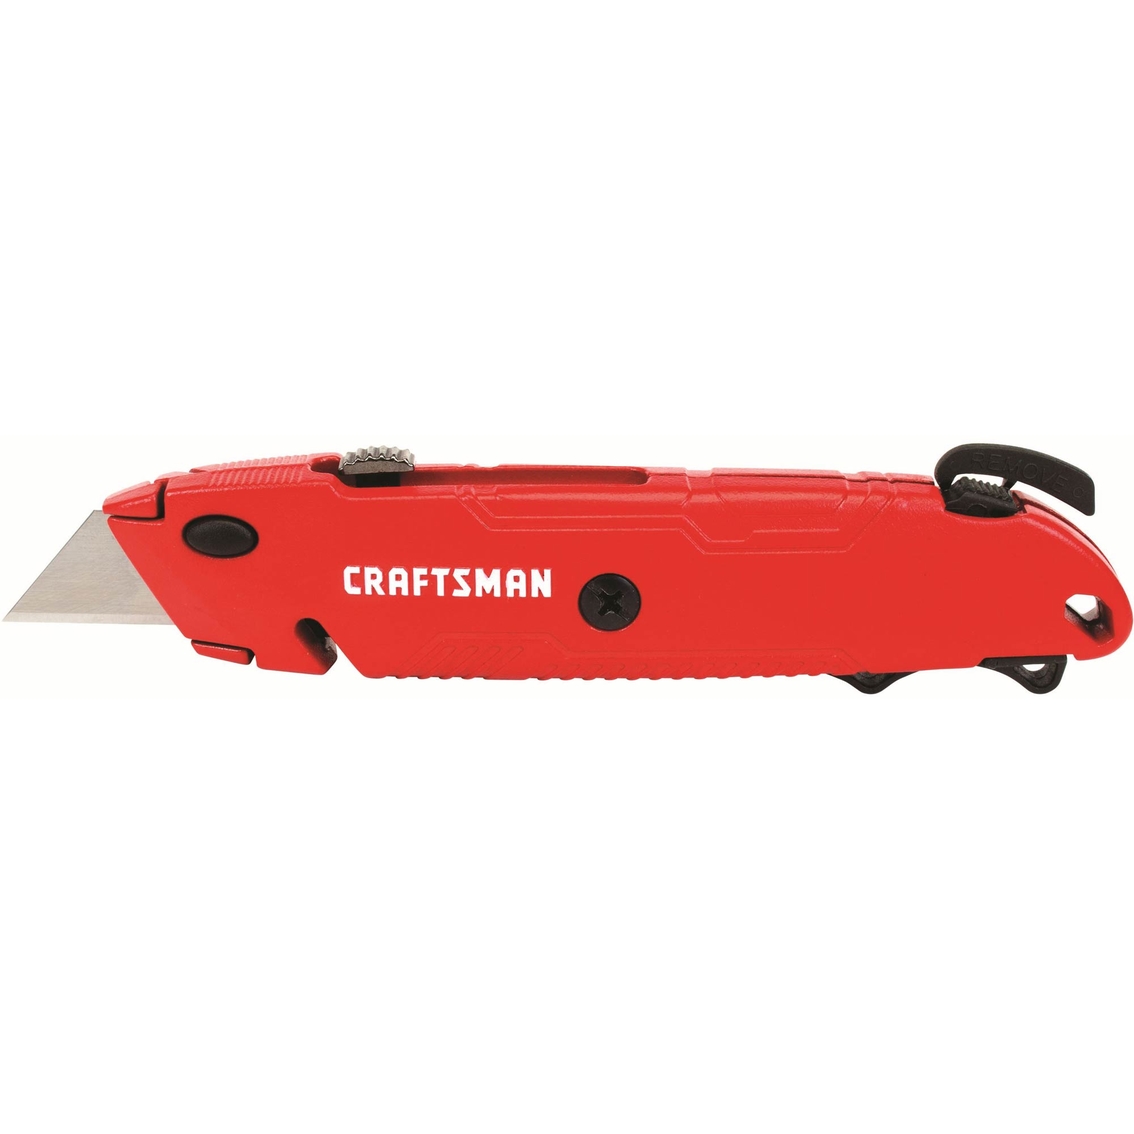 CRAFTSMAN RETRACTABLE UTILITY KNIFE - Image 2 of 3